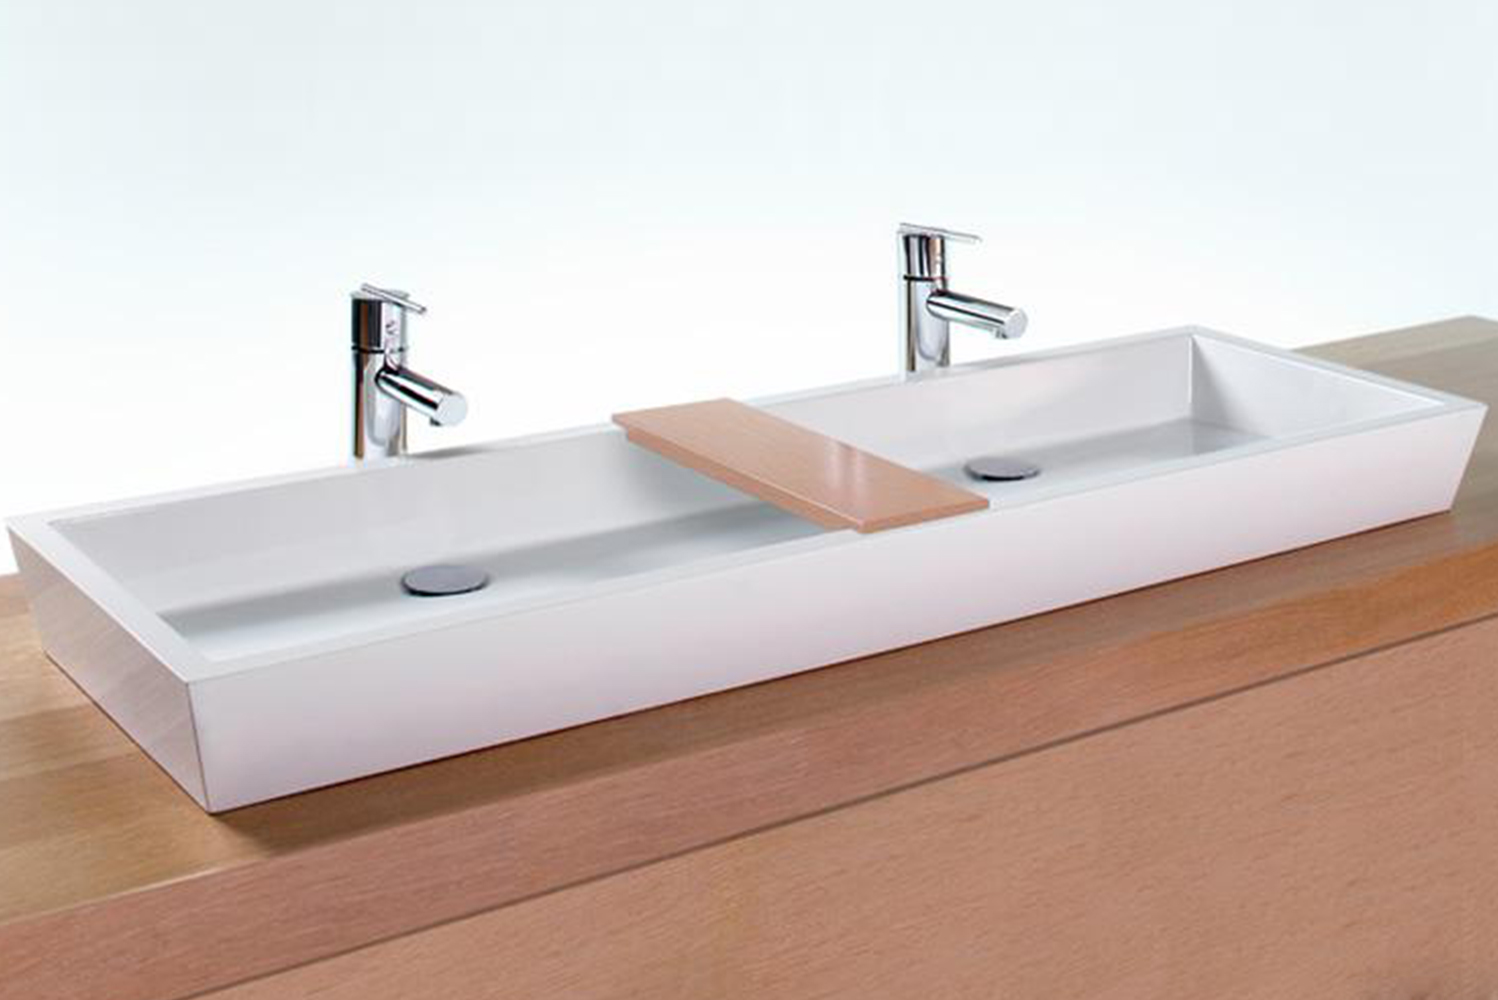 Introducing WETSTYLEs Cube sinks 